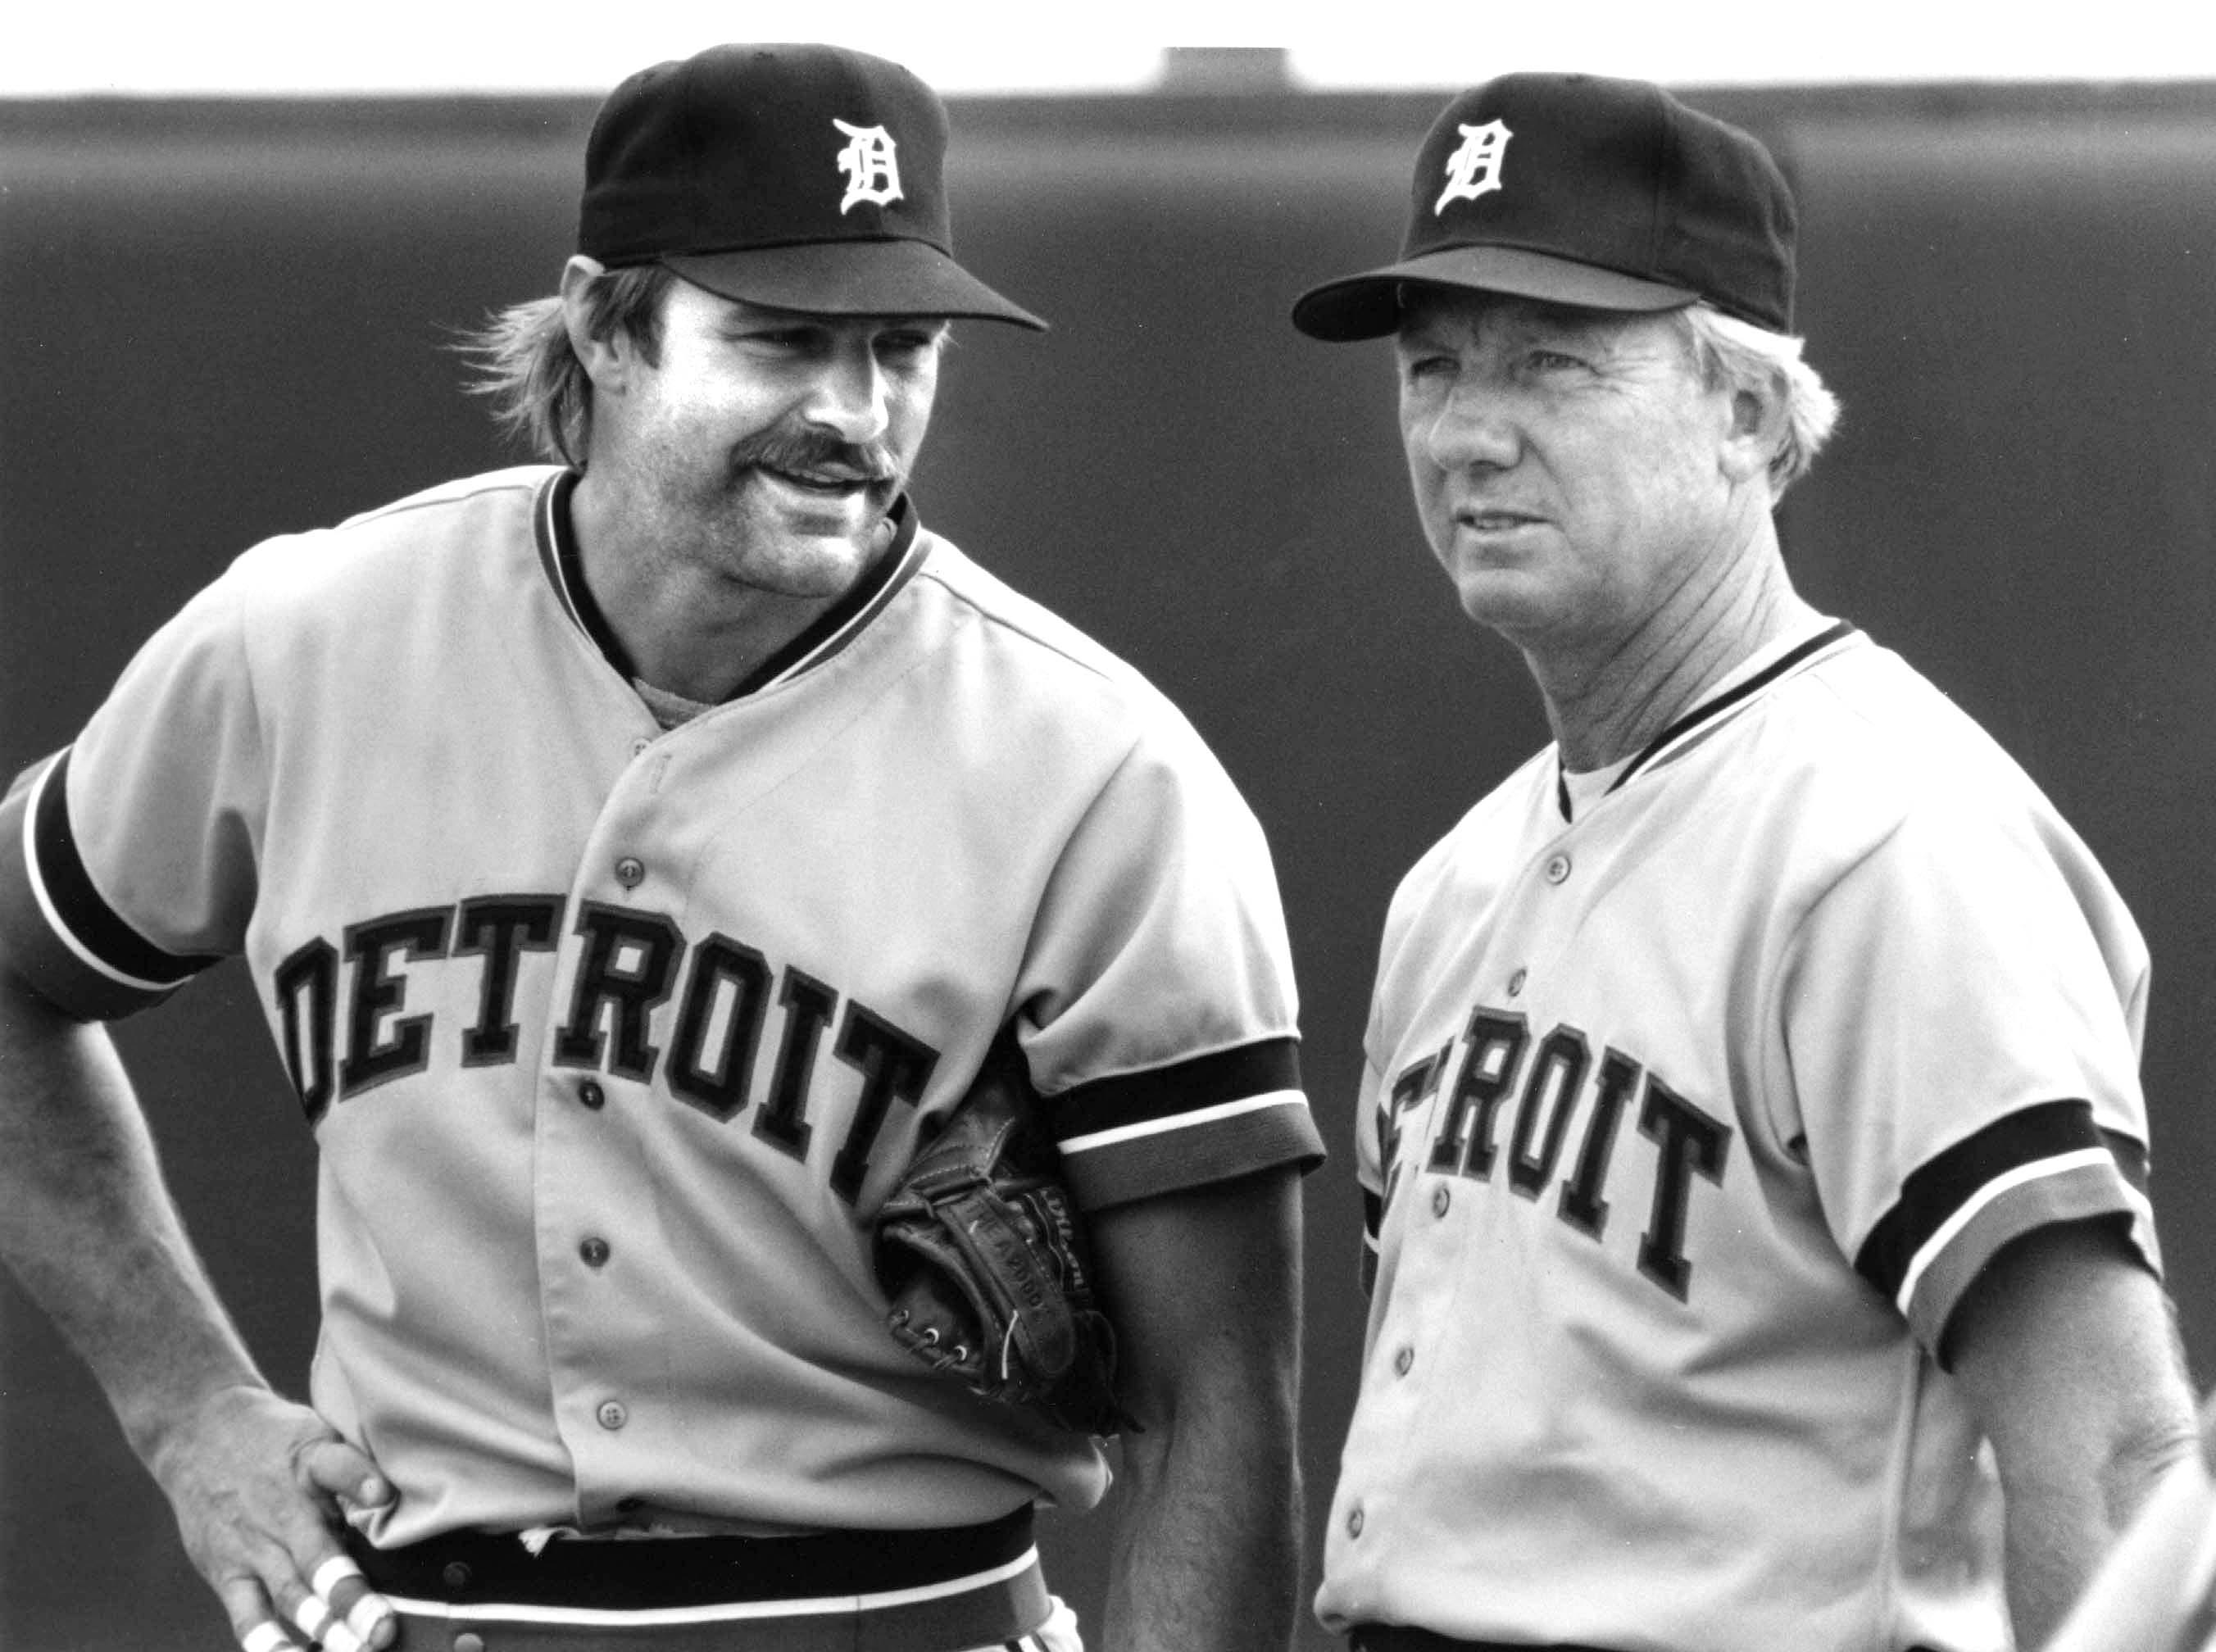 Detroit Tigers' Kirk Gibson, left, stands with Al Kaline in this Detroit News archive photo. Kaline's last year as a Tigers' player was 1974. Gibson's first year was 1979.